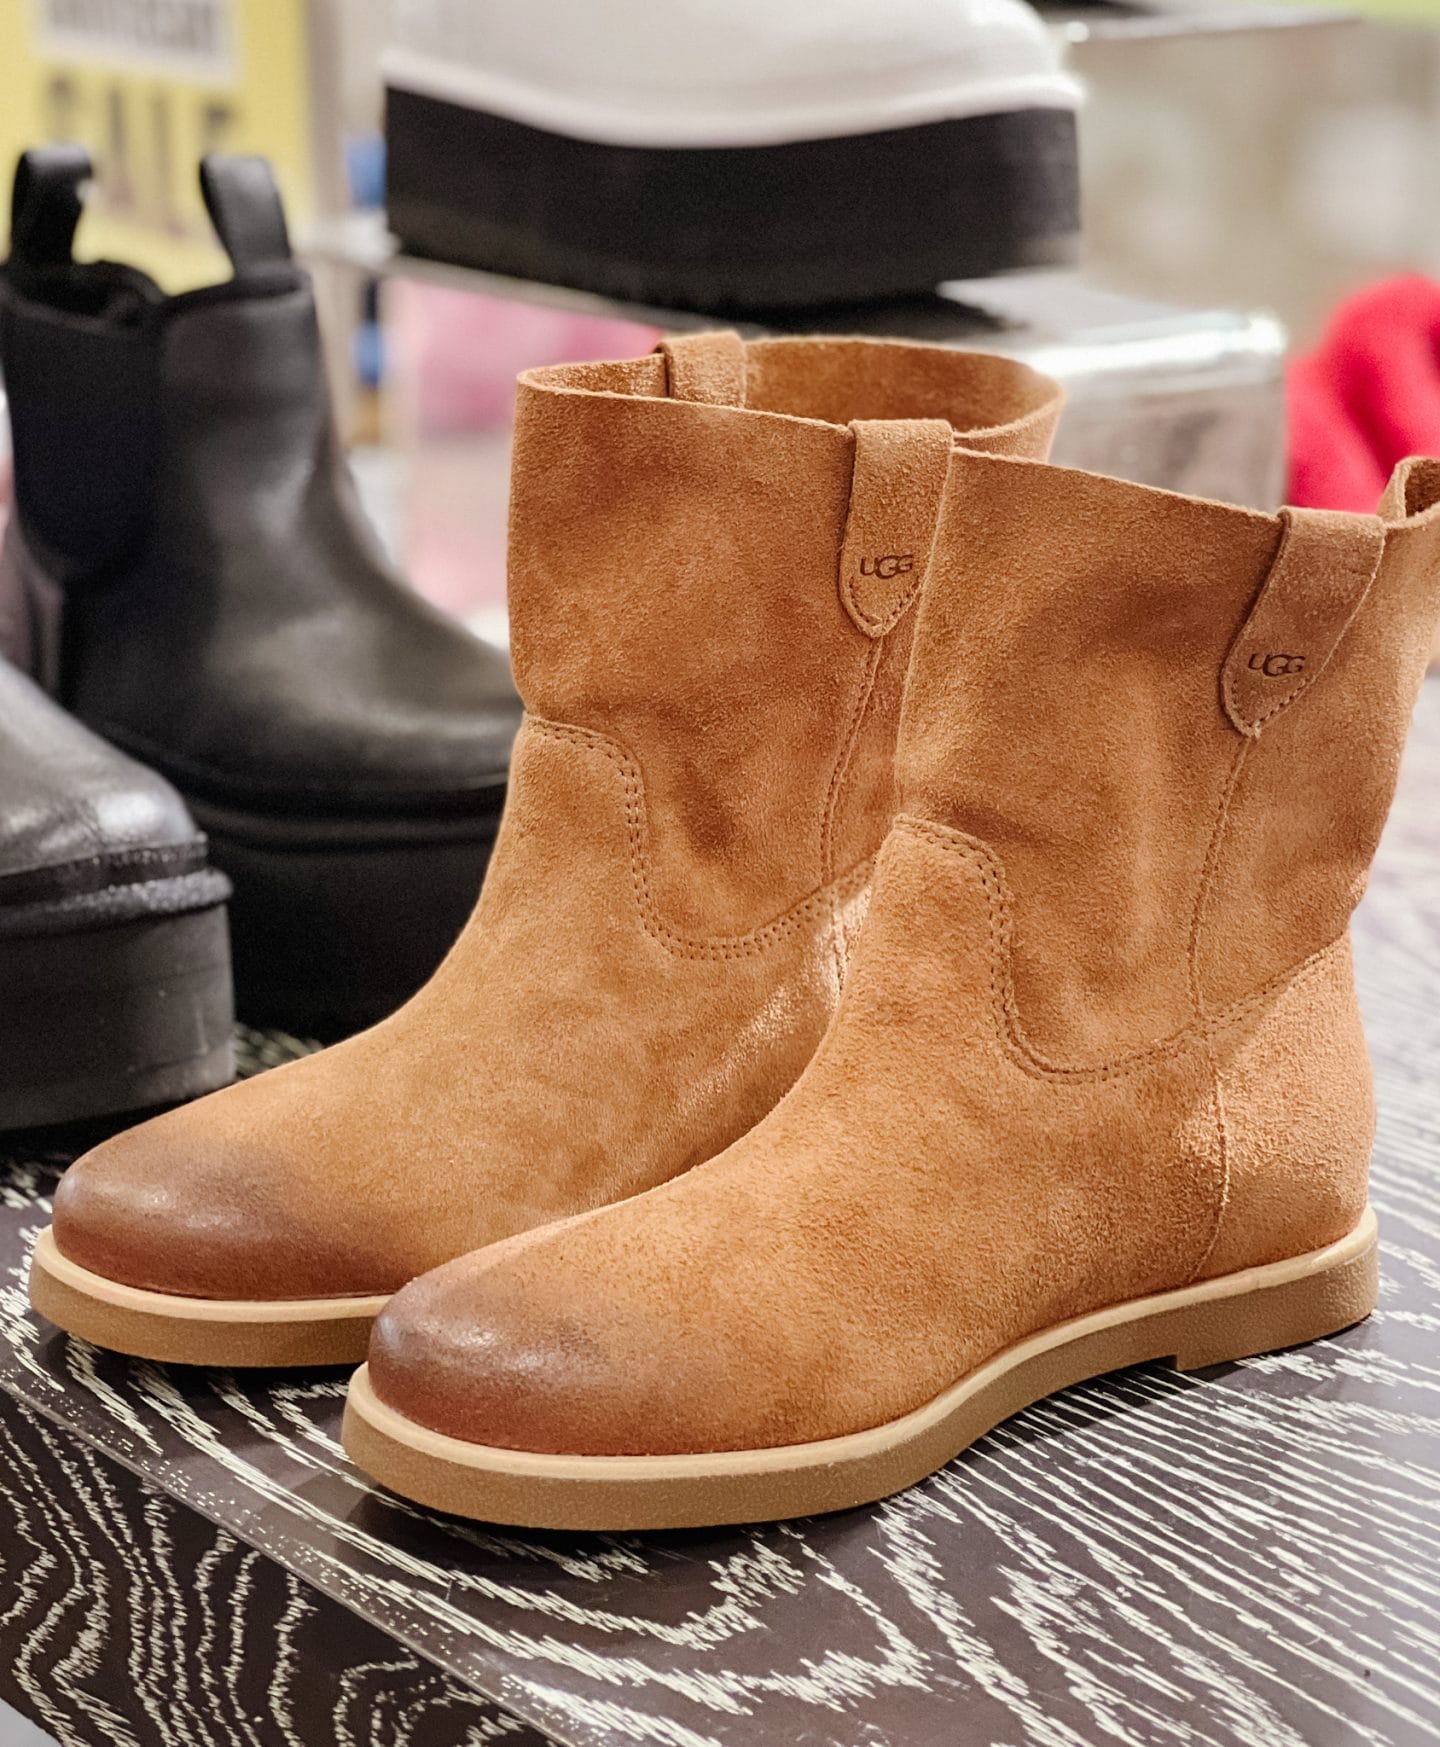 Nordstrom Anniversary Sale, Ugg boots, slouchy ankle boots